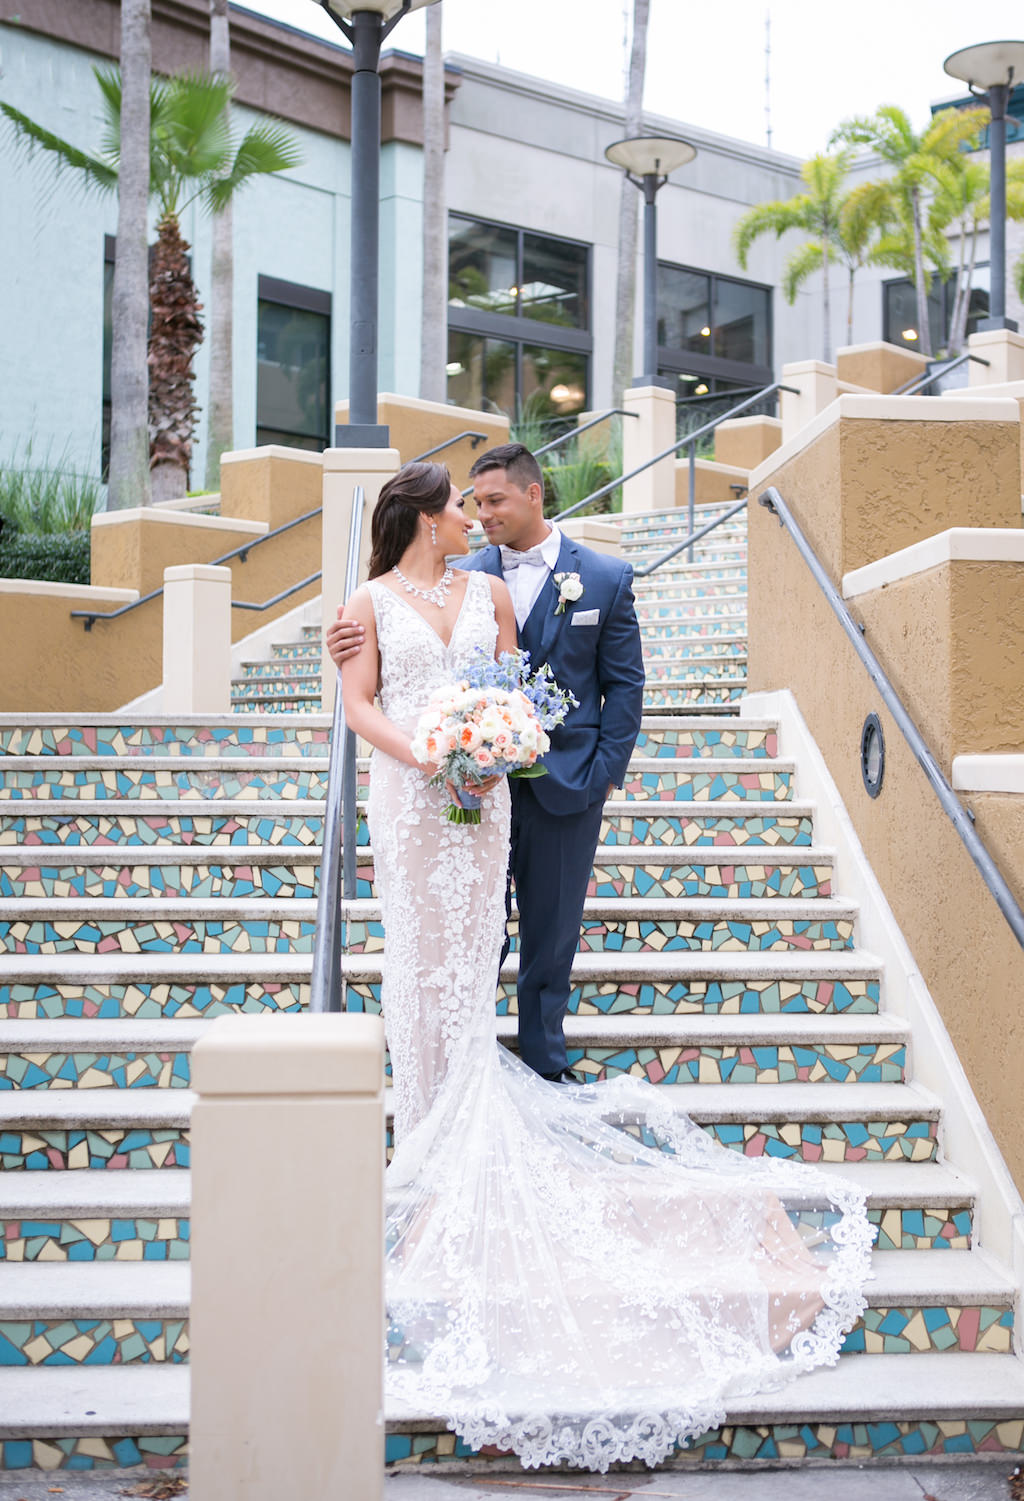 Florida Bride and Groom Staircase Wedding Portrait | Tampa Bay Photographer Carrie Wildes Photography | Hair and Makeup Destiny and Light Hair and Makeup Group | Wedding Attire Nikki's Glitz and Glam Boutique | Florist Gabro Event Services | Hotel Wedding Venue Renaissance Tampa International Plaza